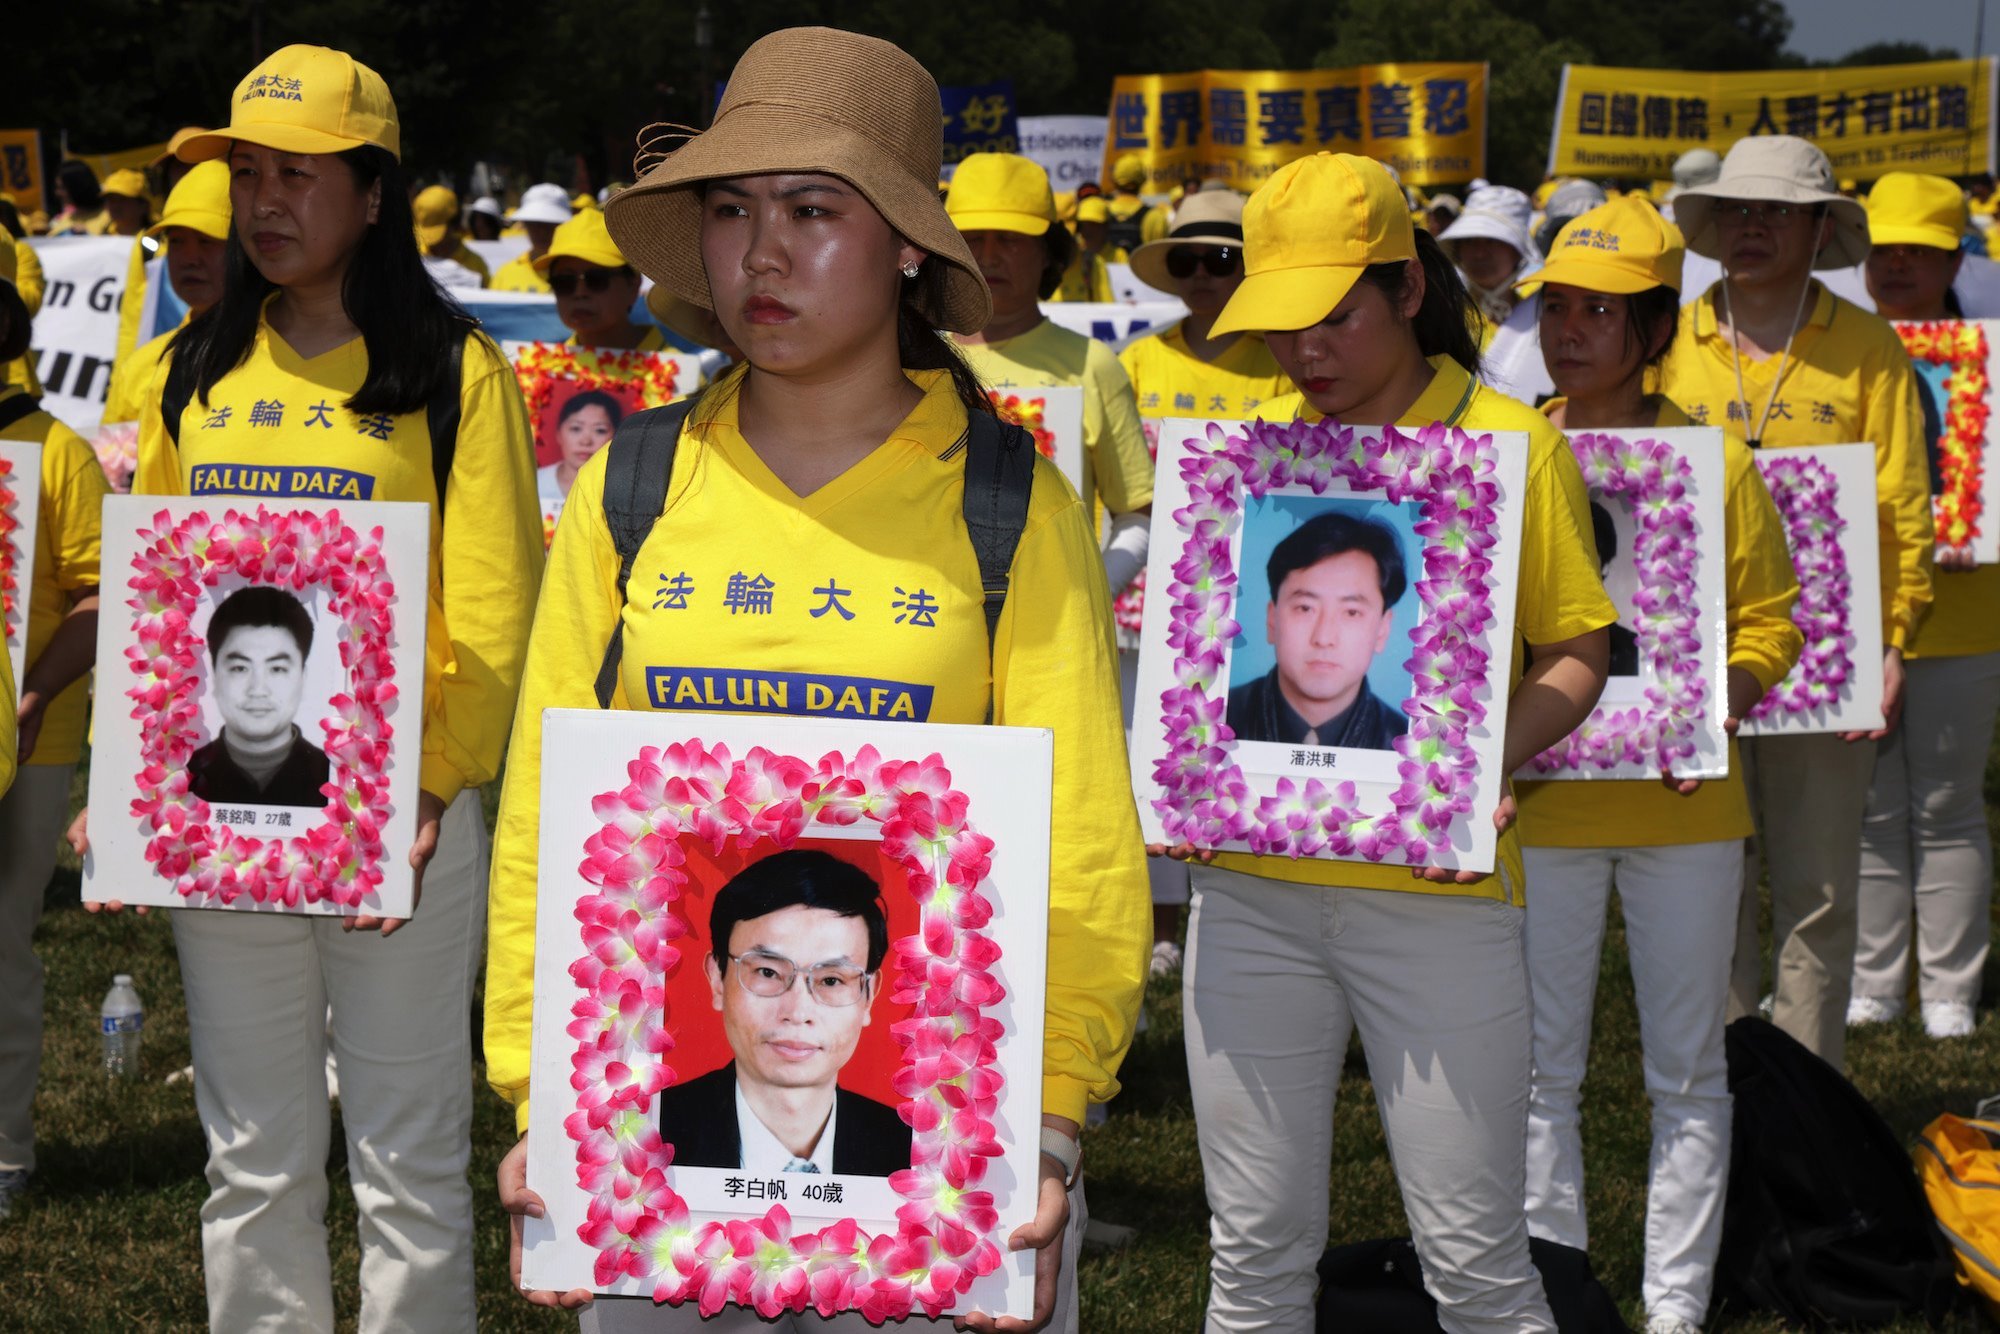 Falun Gong protesters hold images of members they say were killed by the Chinese state